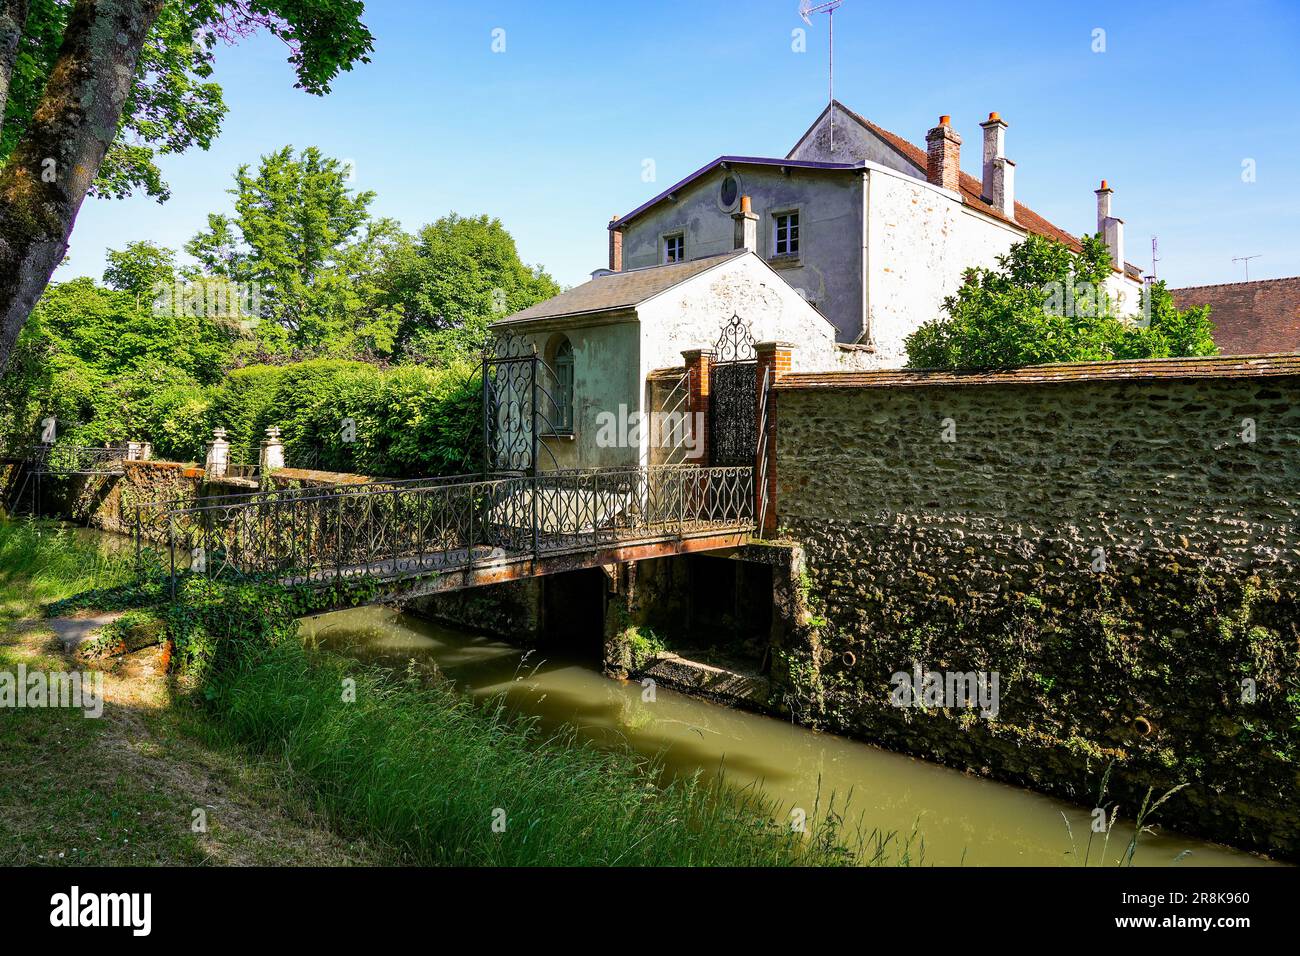 Access bridges spanning the Grand Morin river to reach some private gardens and backyards in Crécy la Chapelle, a village of Seine et Marne in Paris r Stock Photo